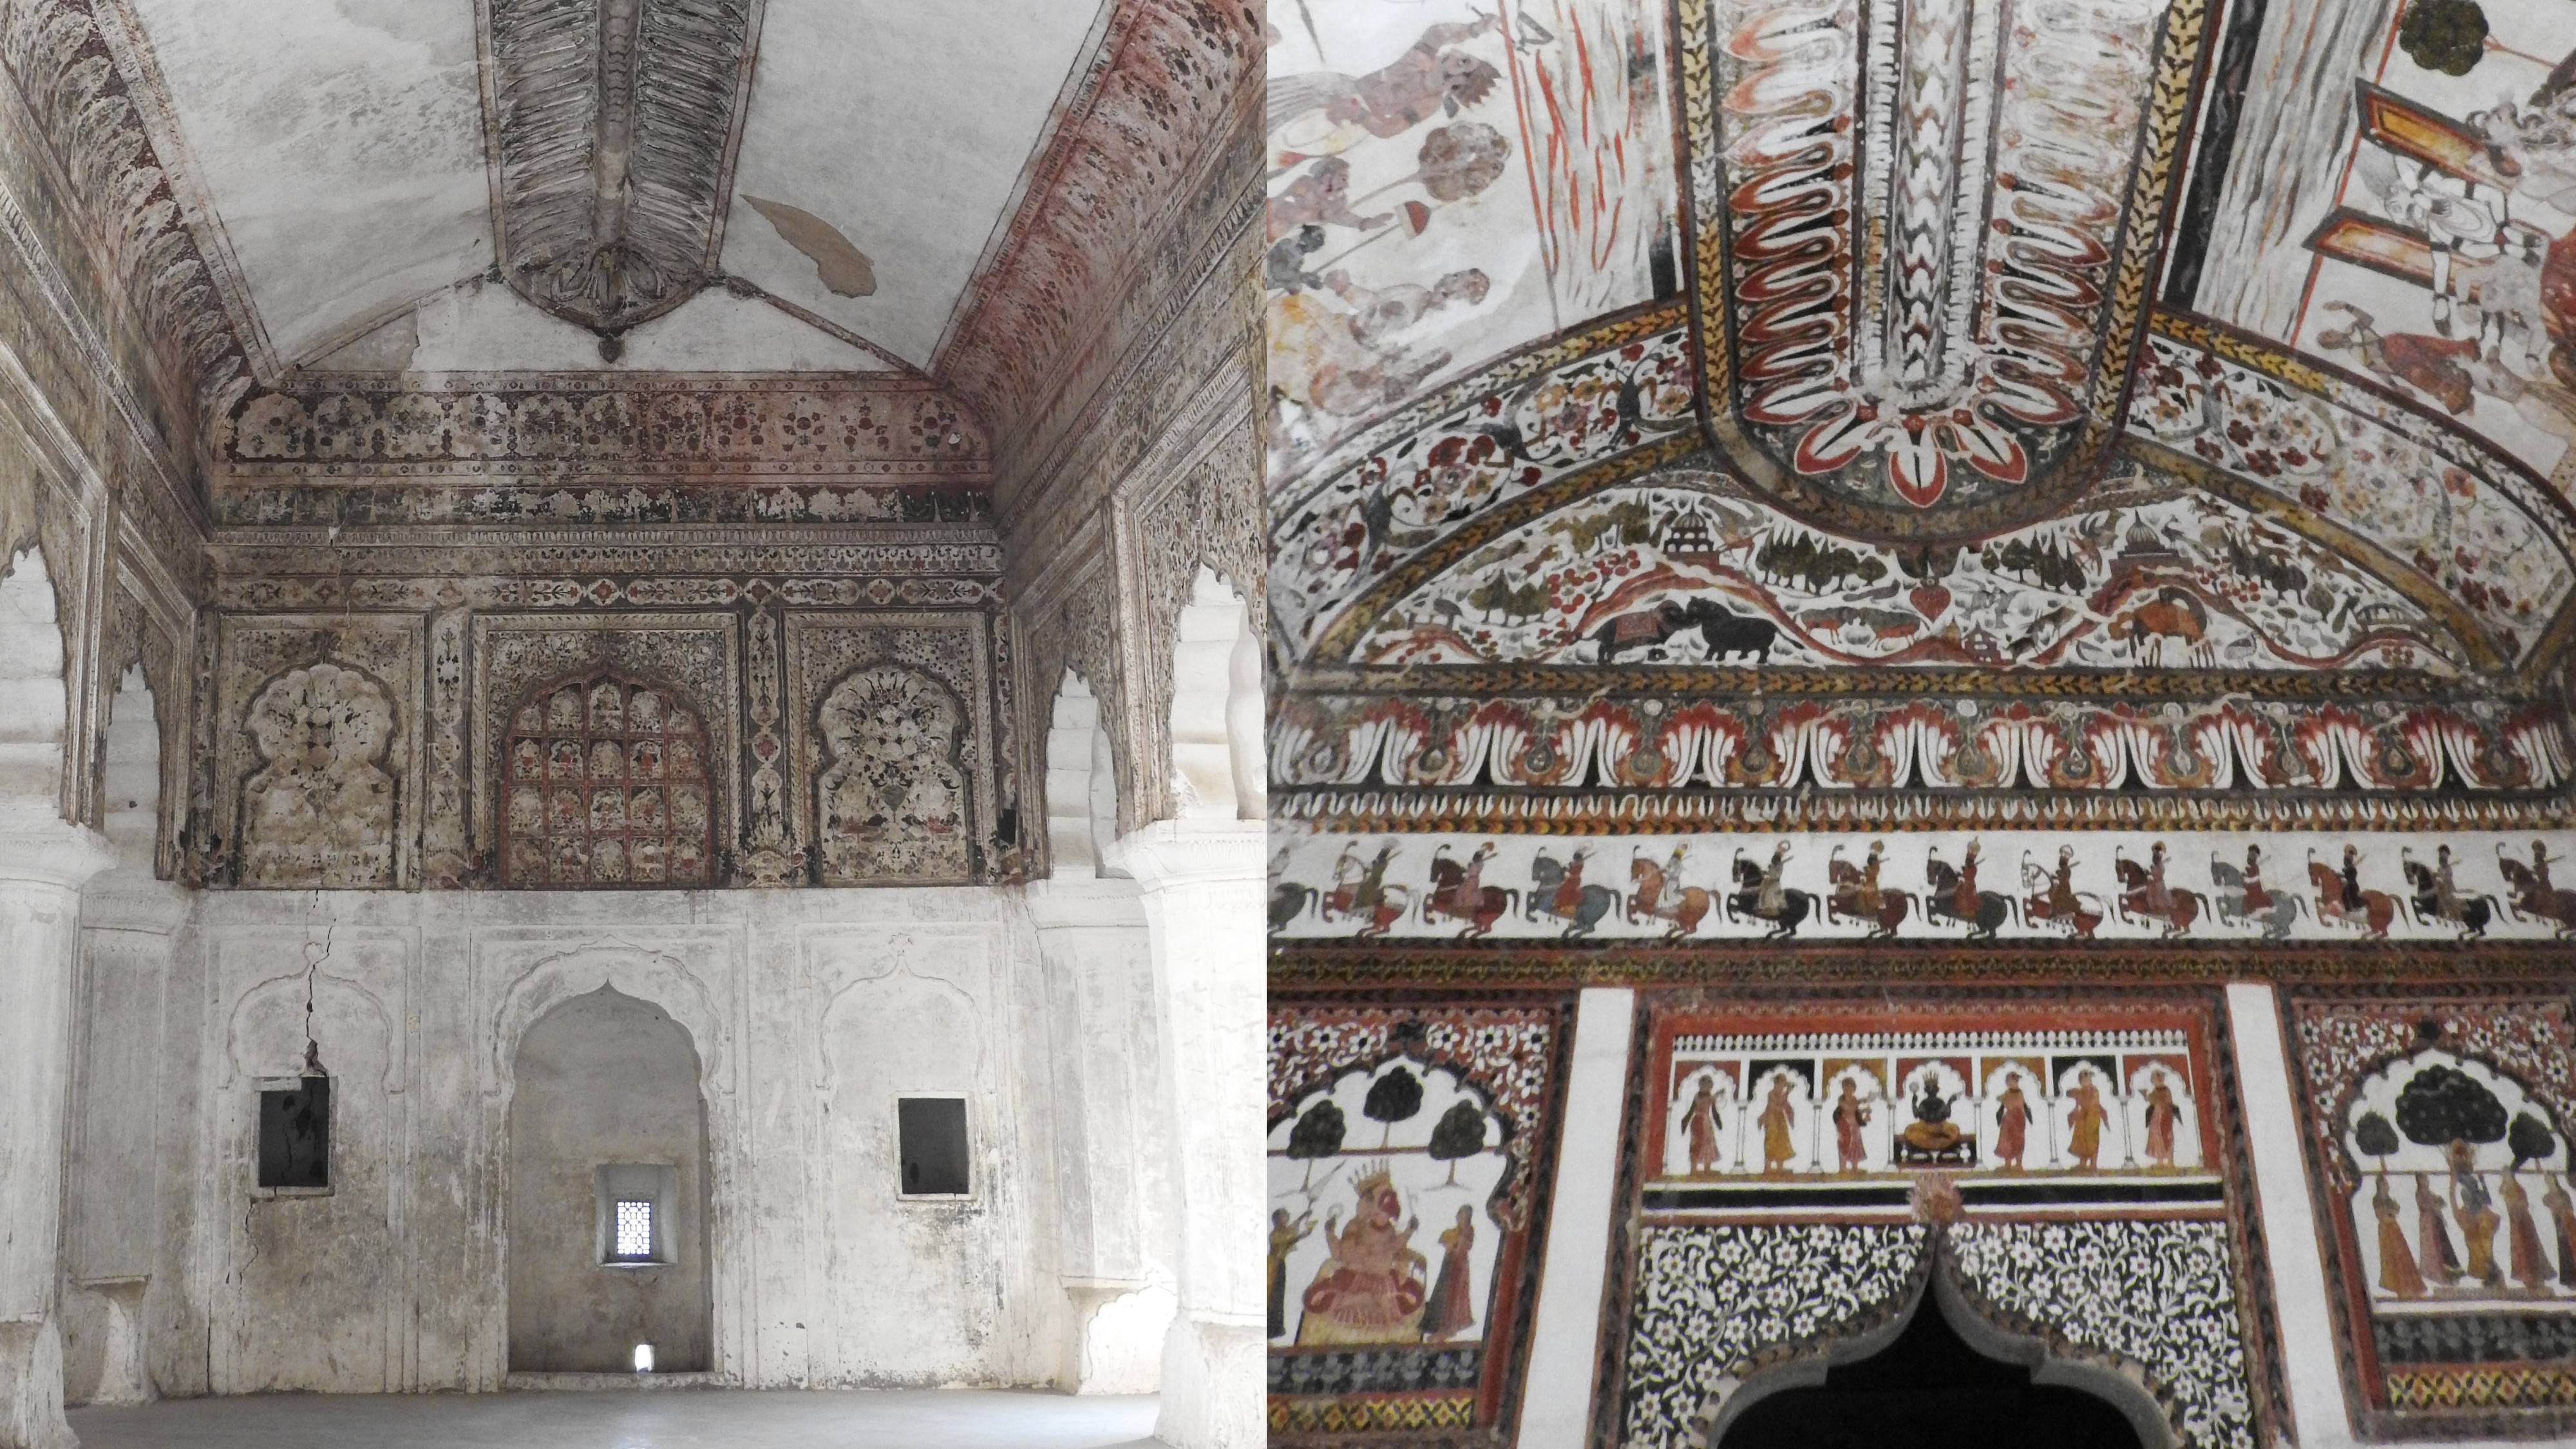 The interiors of the Raja Mahal are richly decorated with murals depicting folklore and mythology.